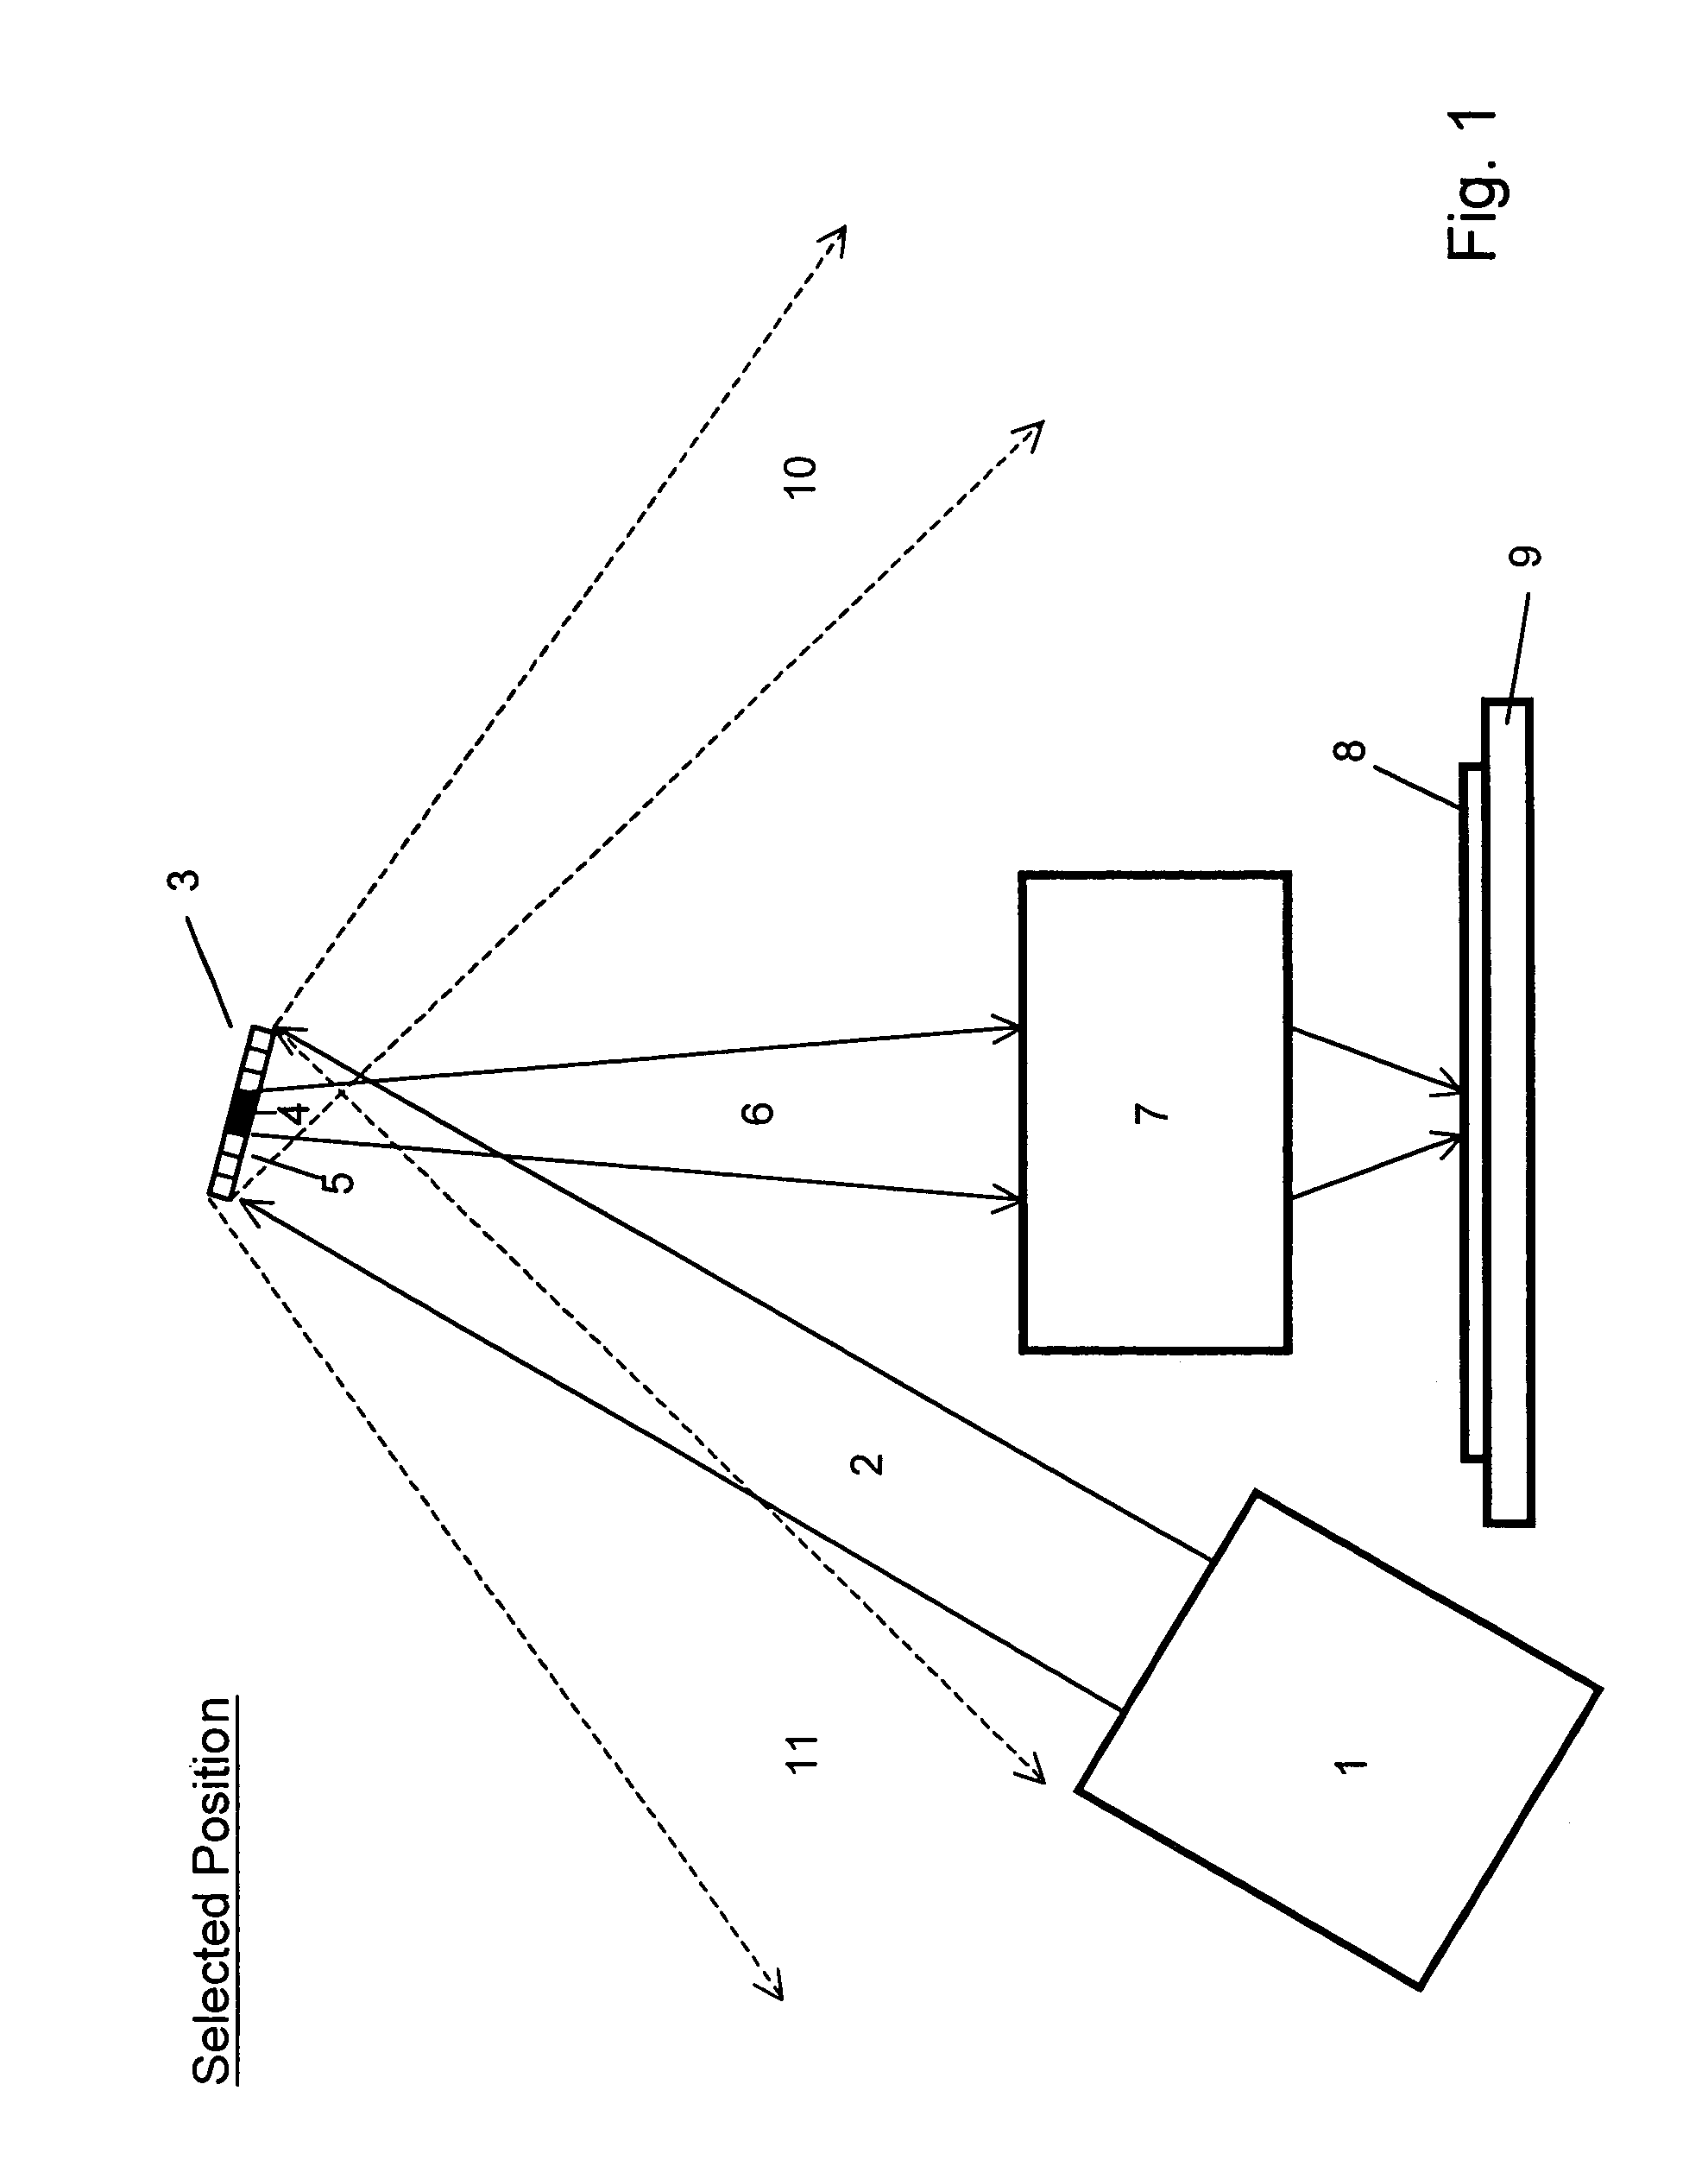 Spatial light modulator array with heat minimization and image enhancement features